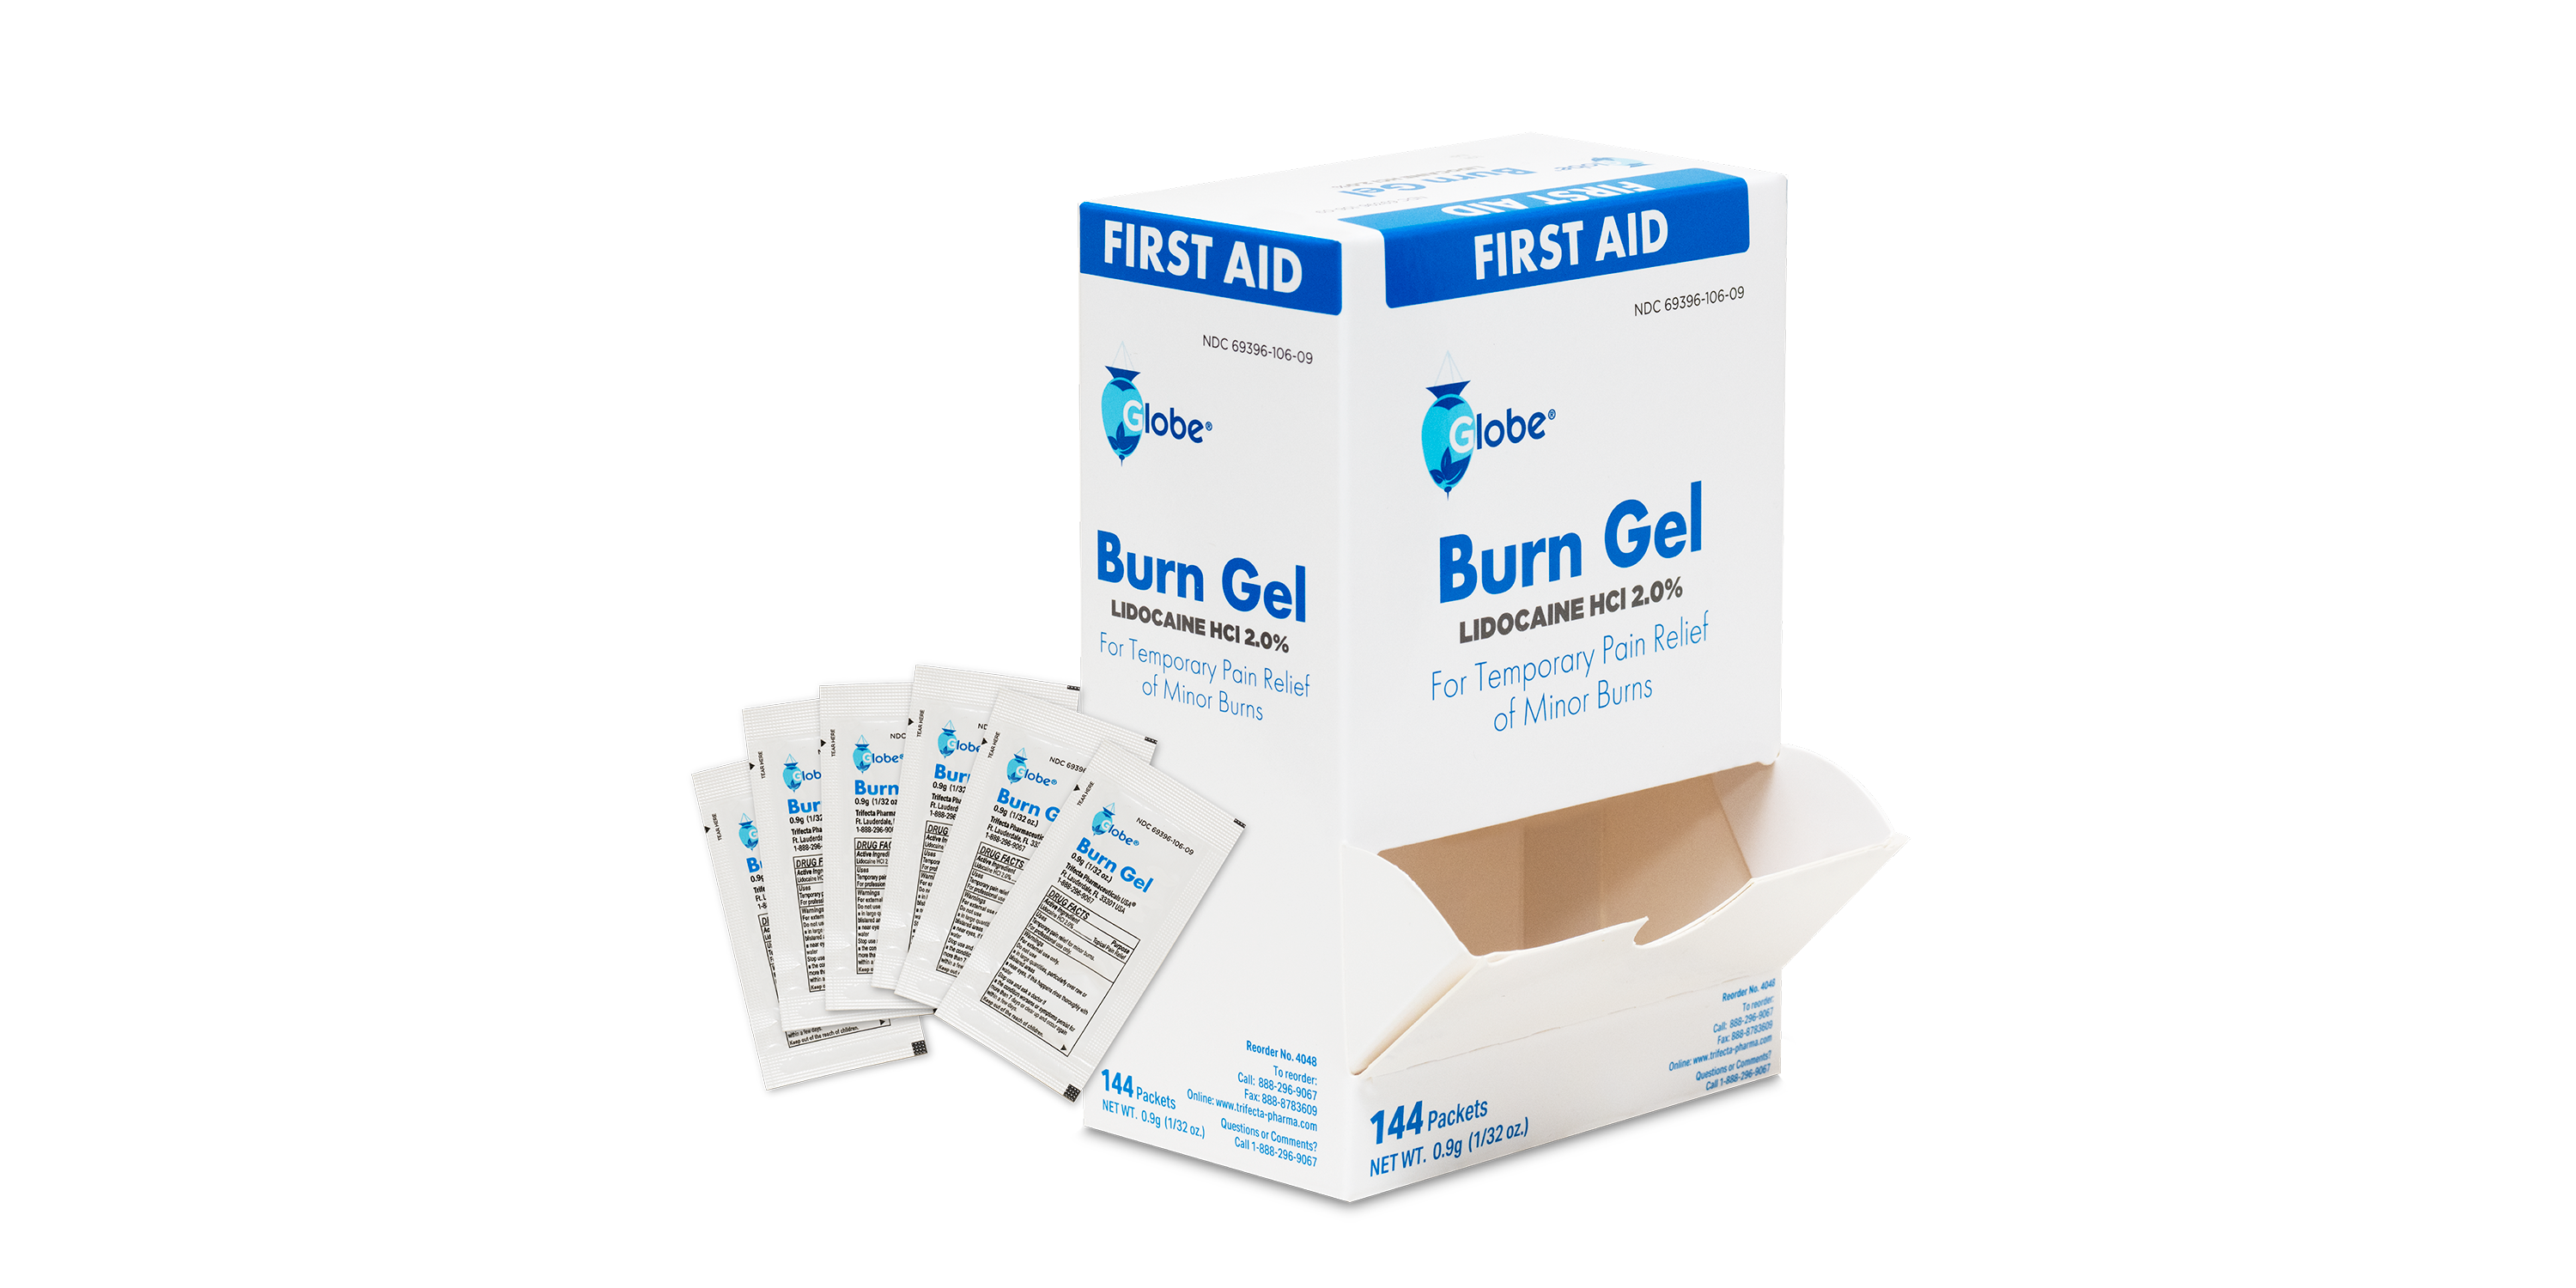 Globe First Aid Burn Gel with Aloe 0.9g Packets, (Box of 144) Advanced First Aid Gel for Temporary Relief of Minor Burns, Cuts, and Scrapes 974